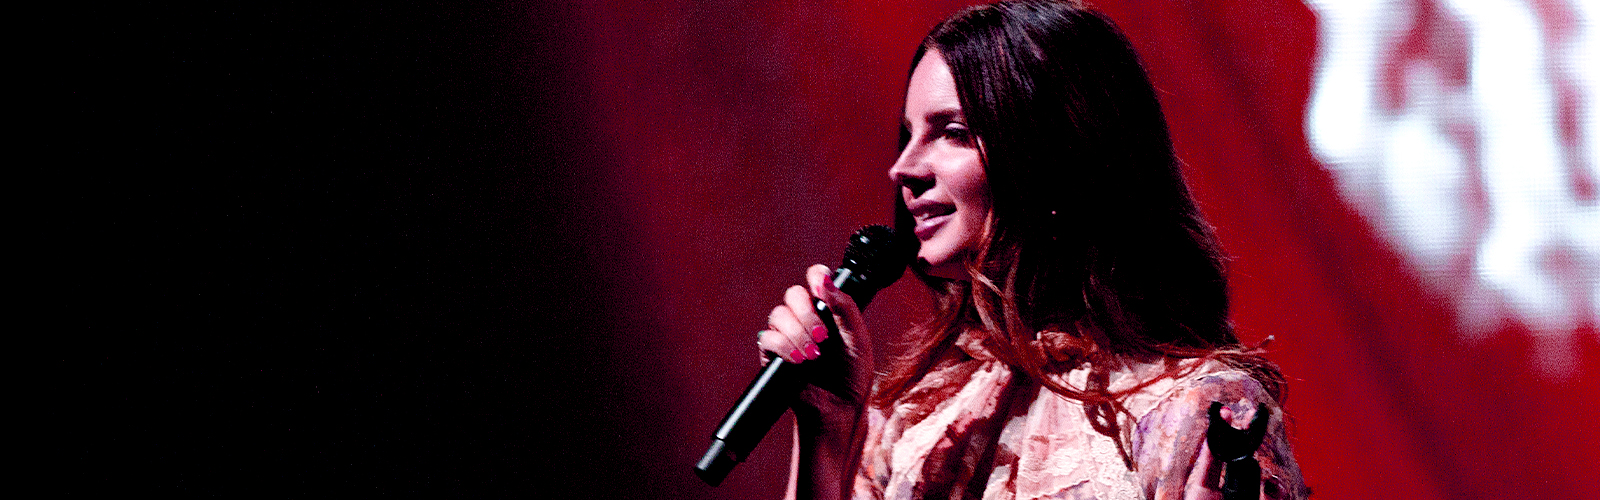 10 Best Lana Del Ray Songs of All Time 